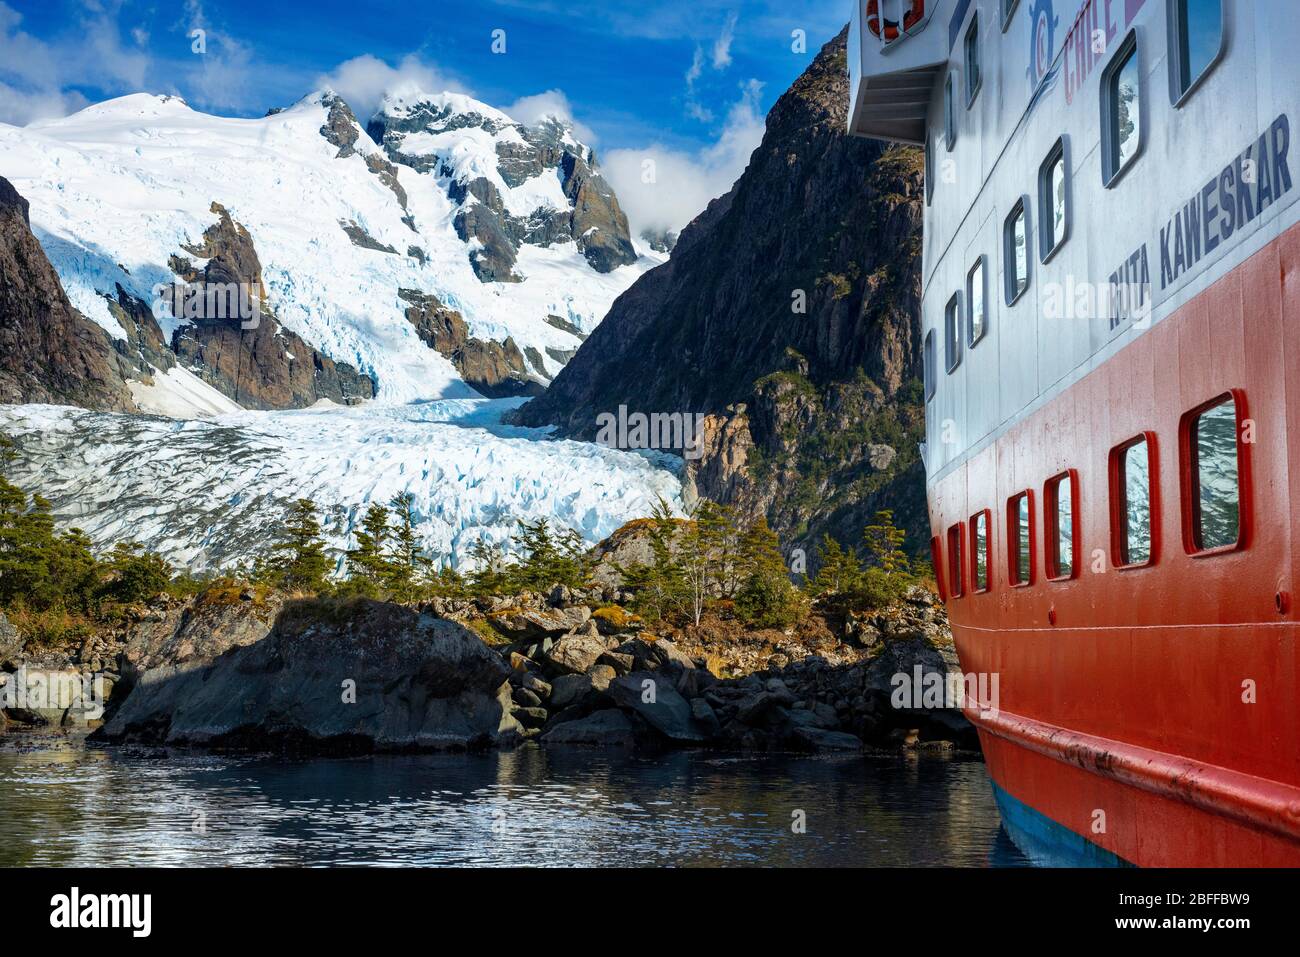 Skorpios III cruise at Bernal glacier in the Las montanas fjord On The Edge Of The Sarmiento Channel in Bernardo O'Higgins National Park in Patagonia Stock Photo